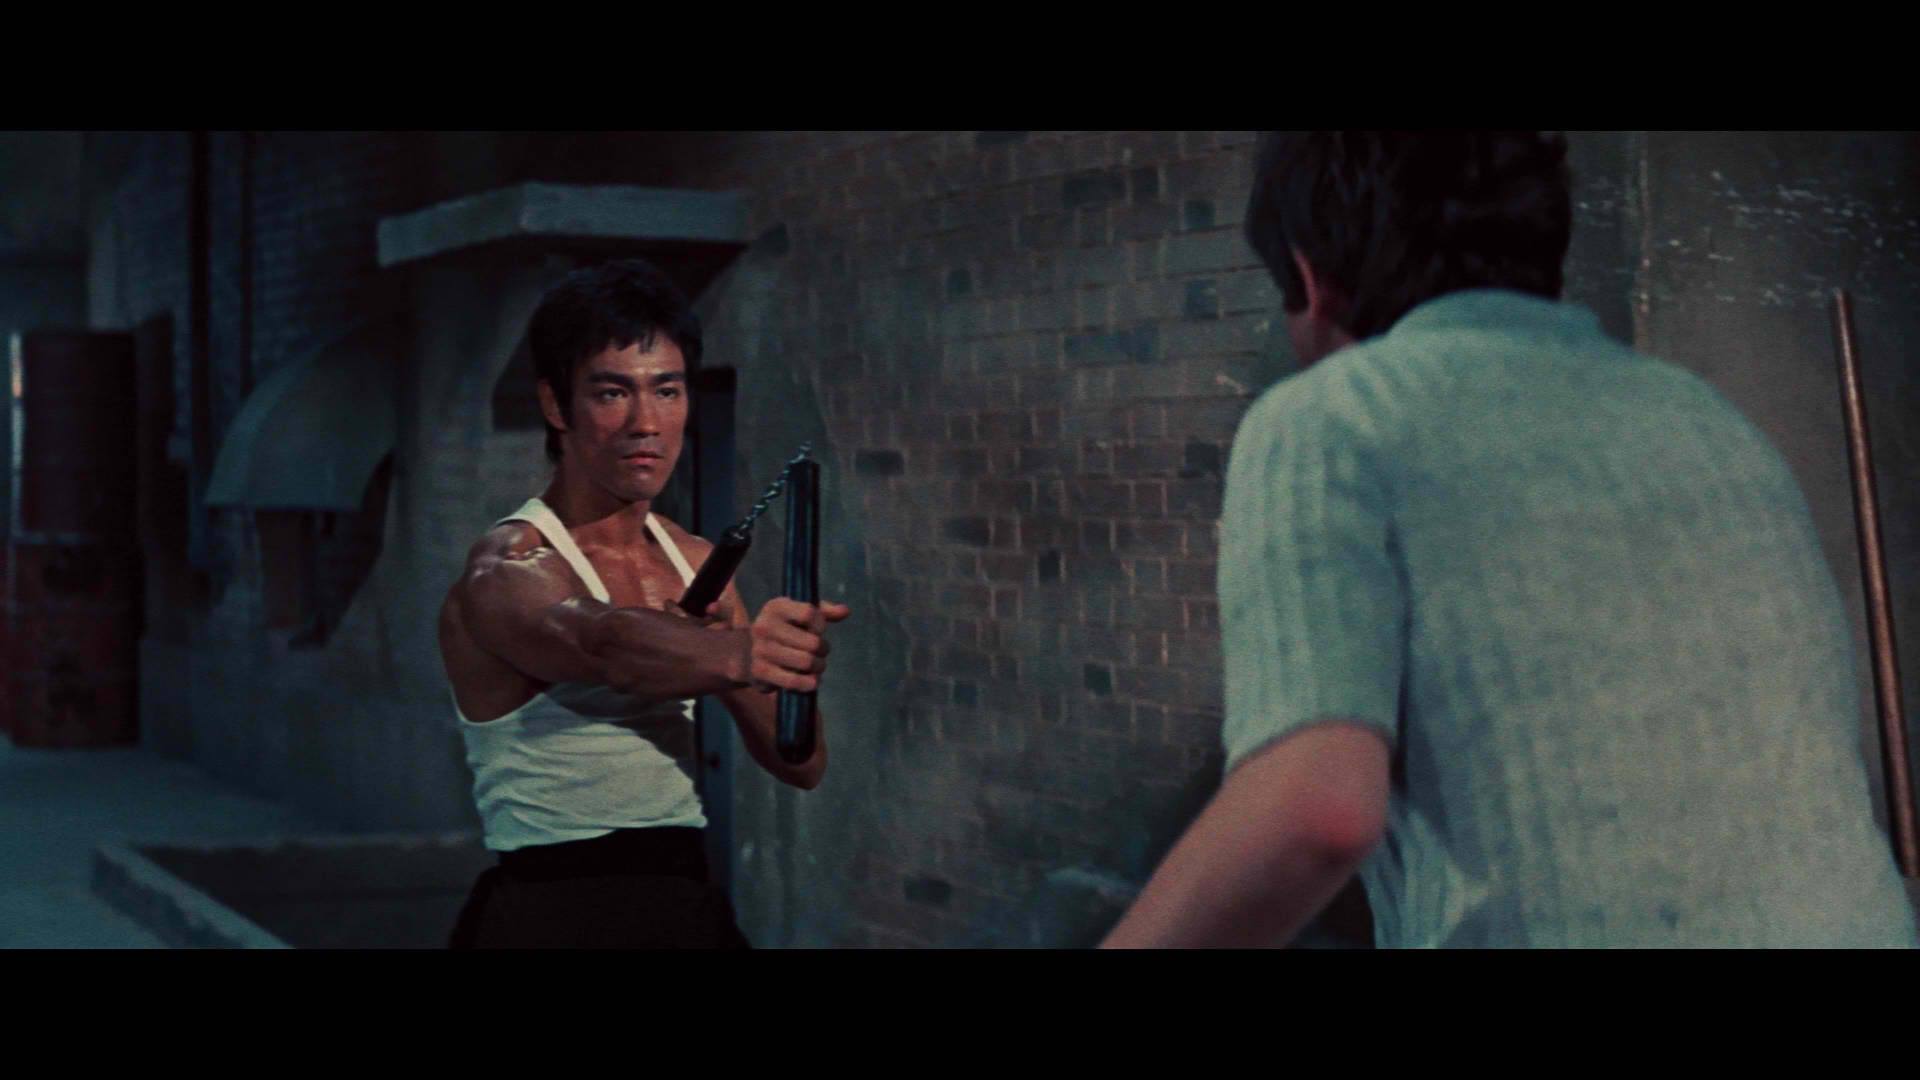 Way-of-the-Dragon-bruce-lee-28252502-1920-1080